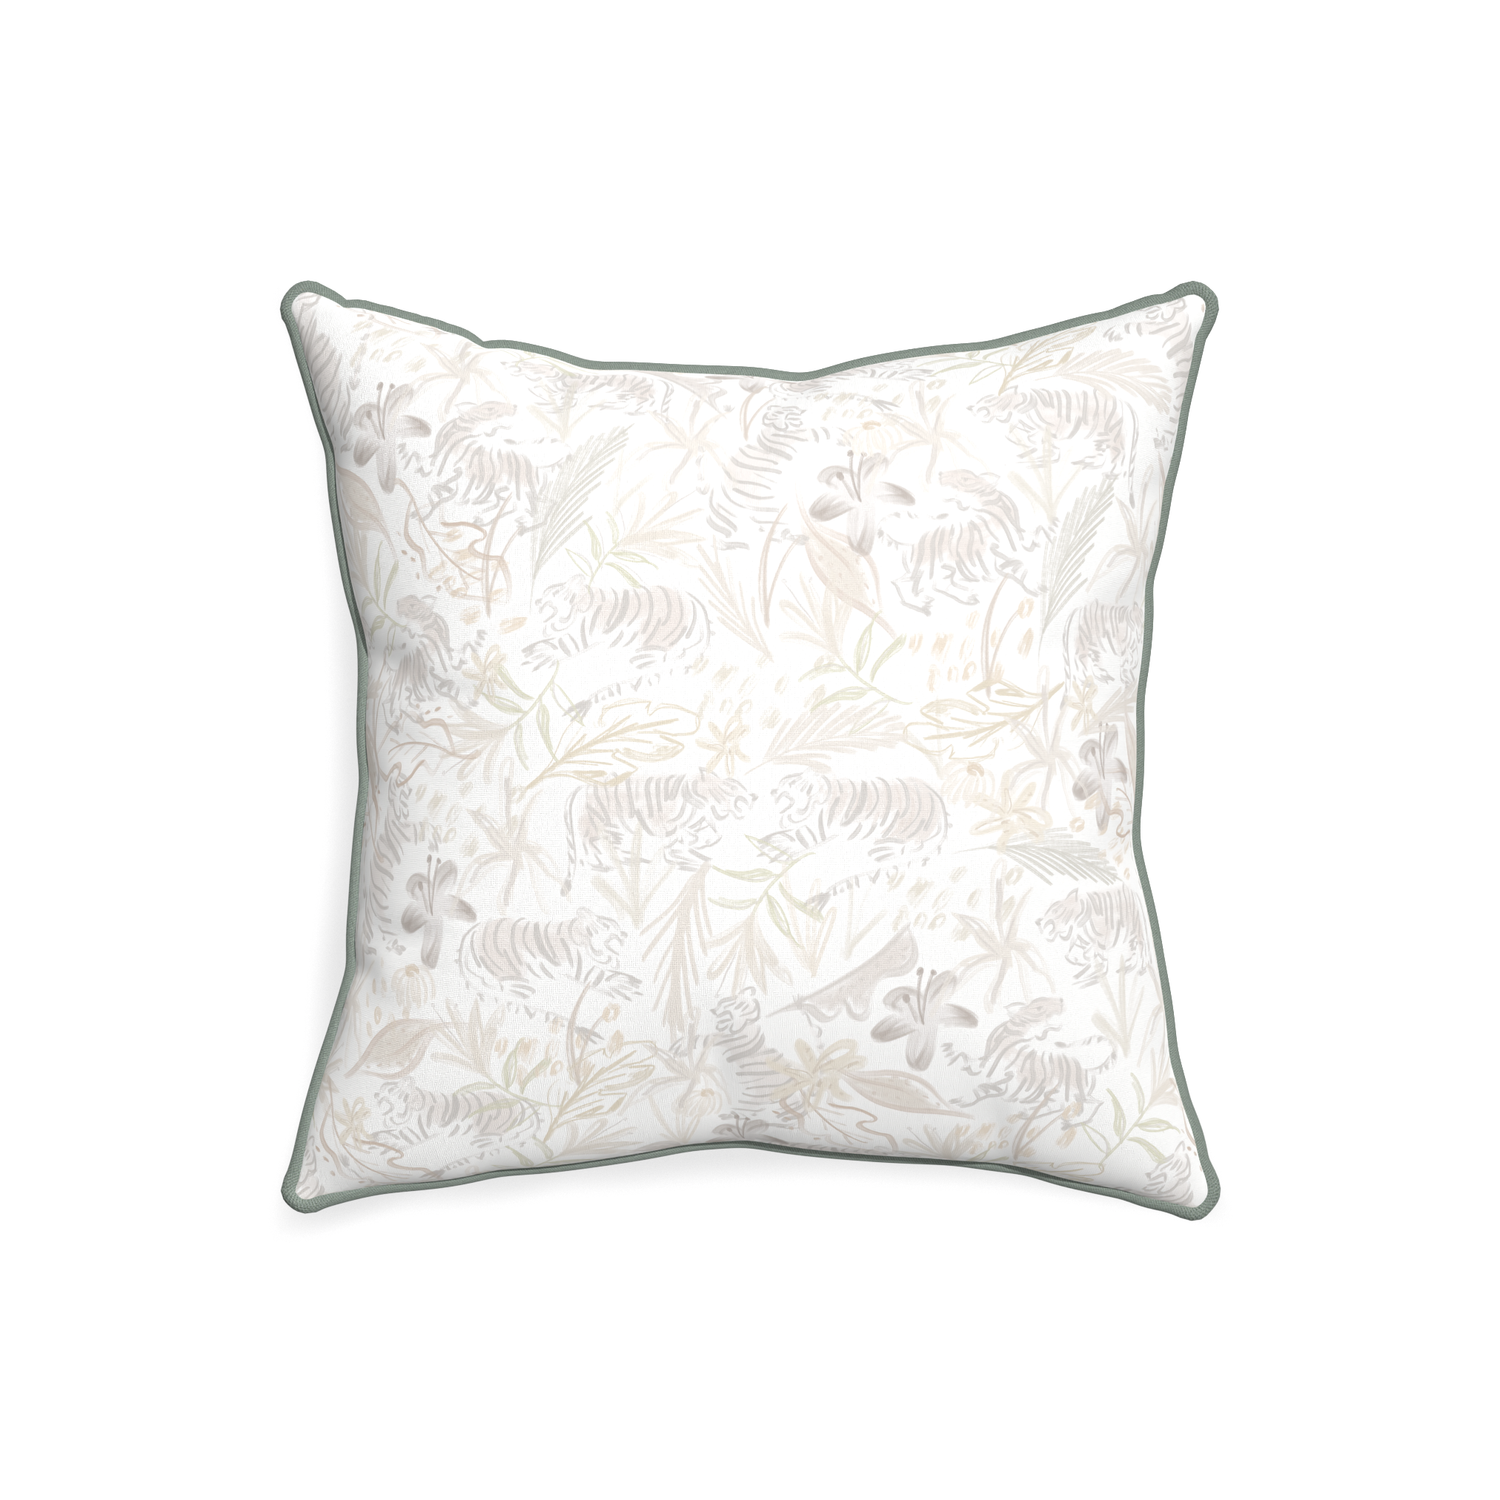 20-square frida sand custom beige chinoiserie tigerpillow with sage piping on white background